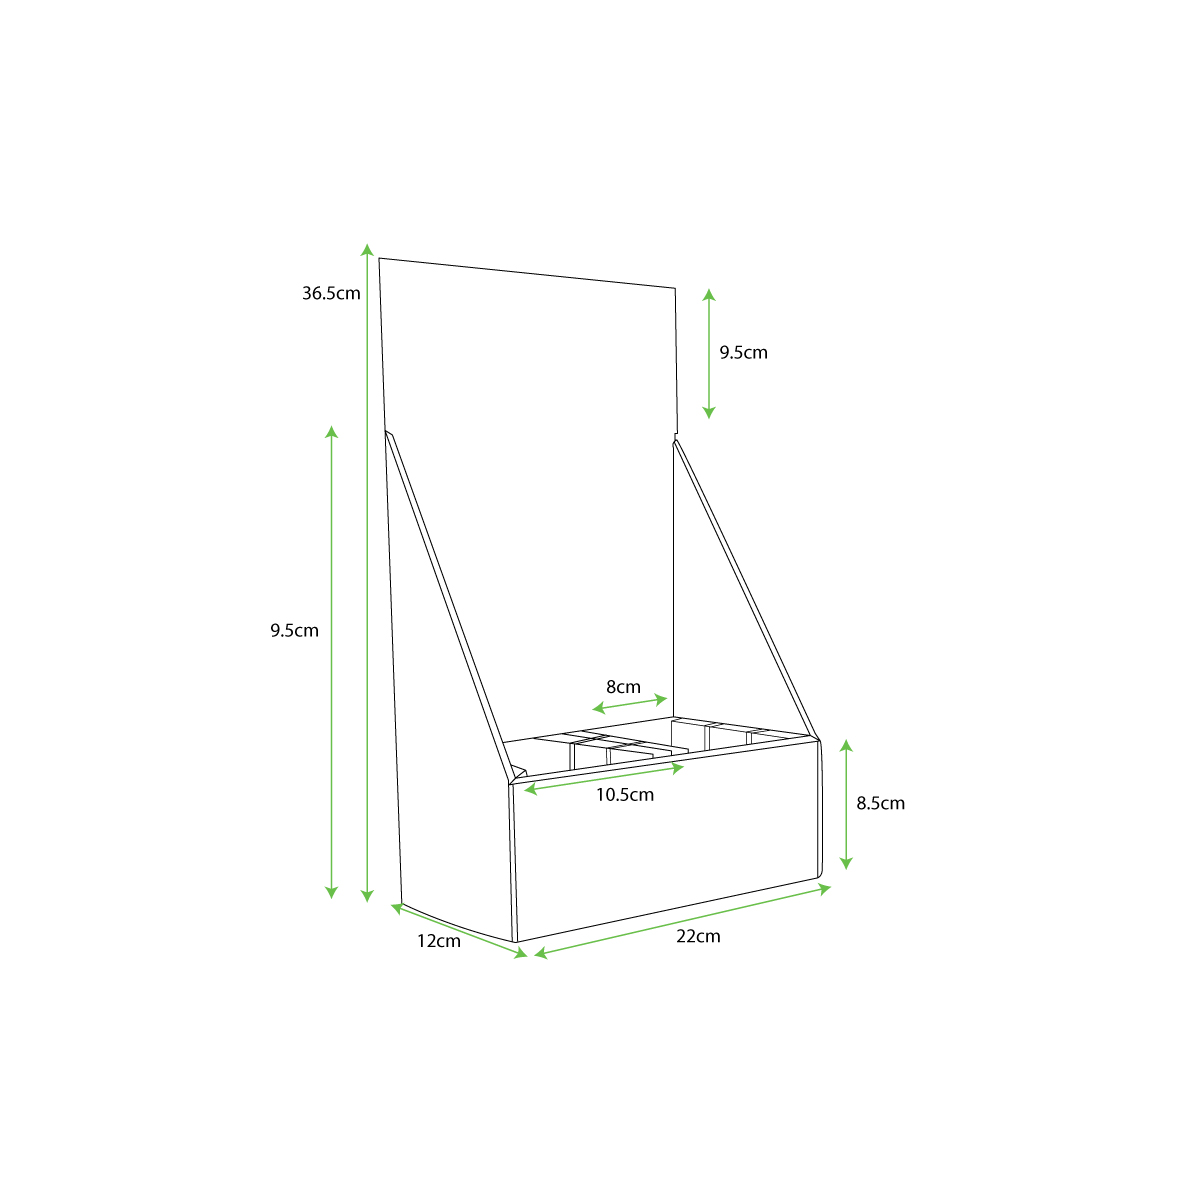 Northey CDU - with dividers - Dimensions